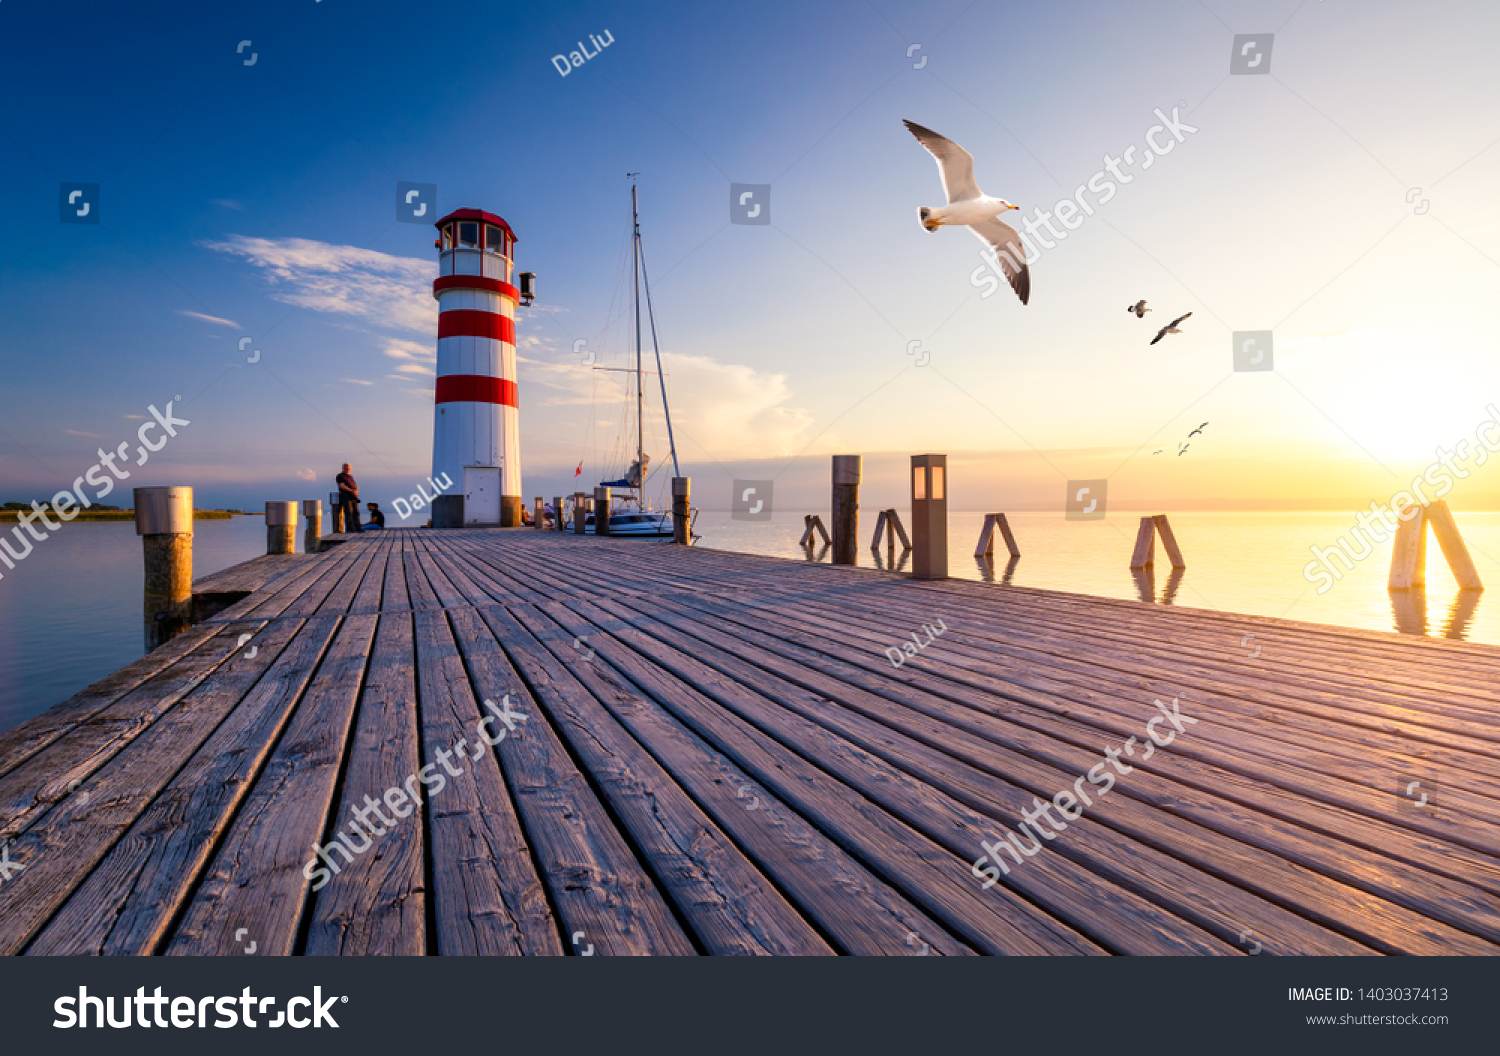 Lighthouse at Lake Neusiedl at sunset near Podersdorf with sea gulls flying around the lighthouse. Burgenland, Austria #1403037413